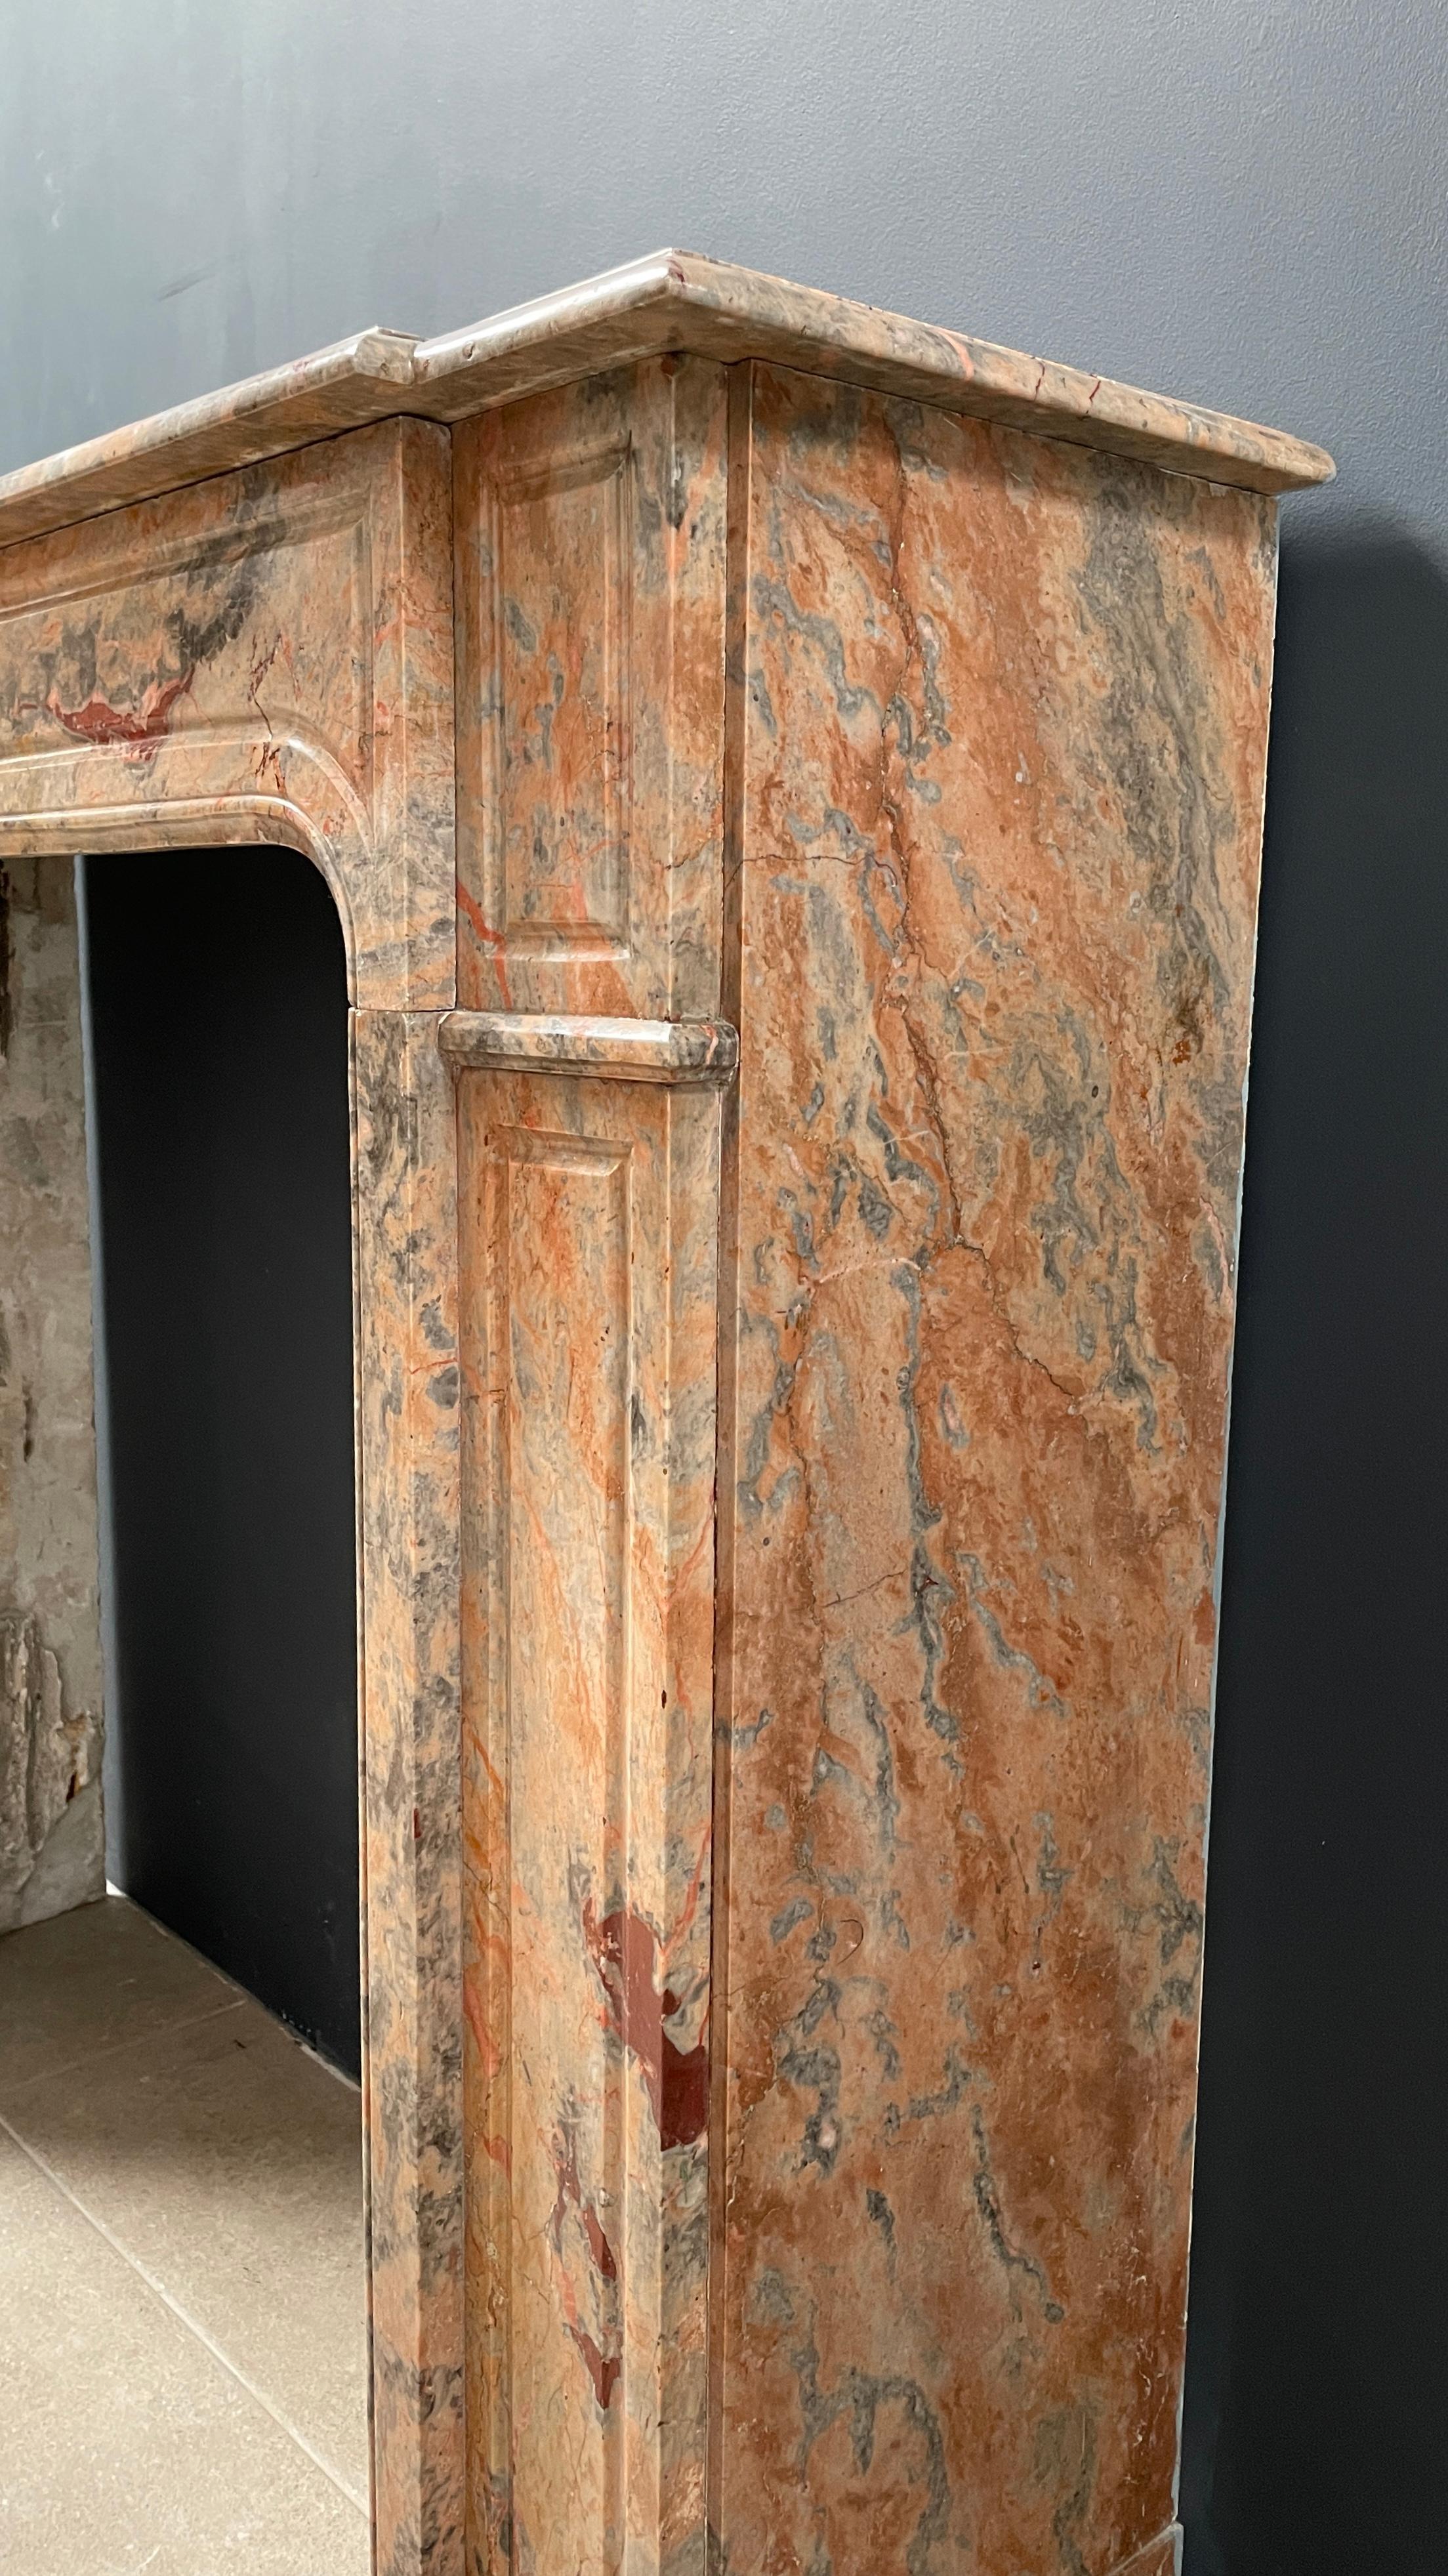 Beautiful antique salmon-colored marble front fireplace. Beautiful antique fireplace in special color. The consoles and the front are profiled. The consoles are slightly recessed in relation to the inner frame. The top follows the lines of the